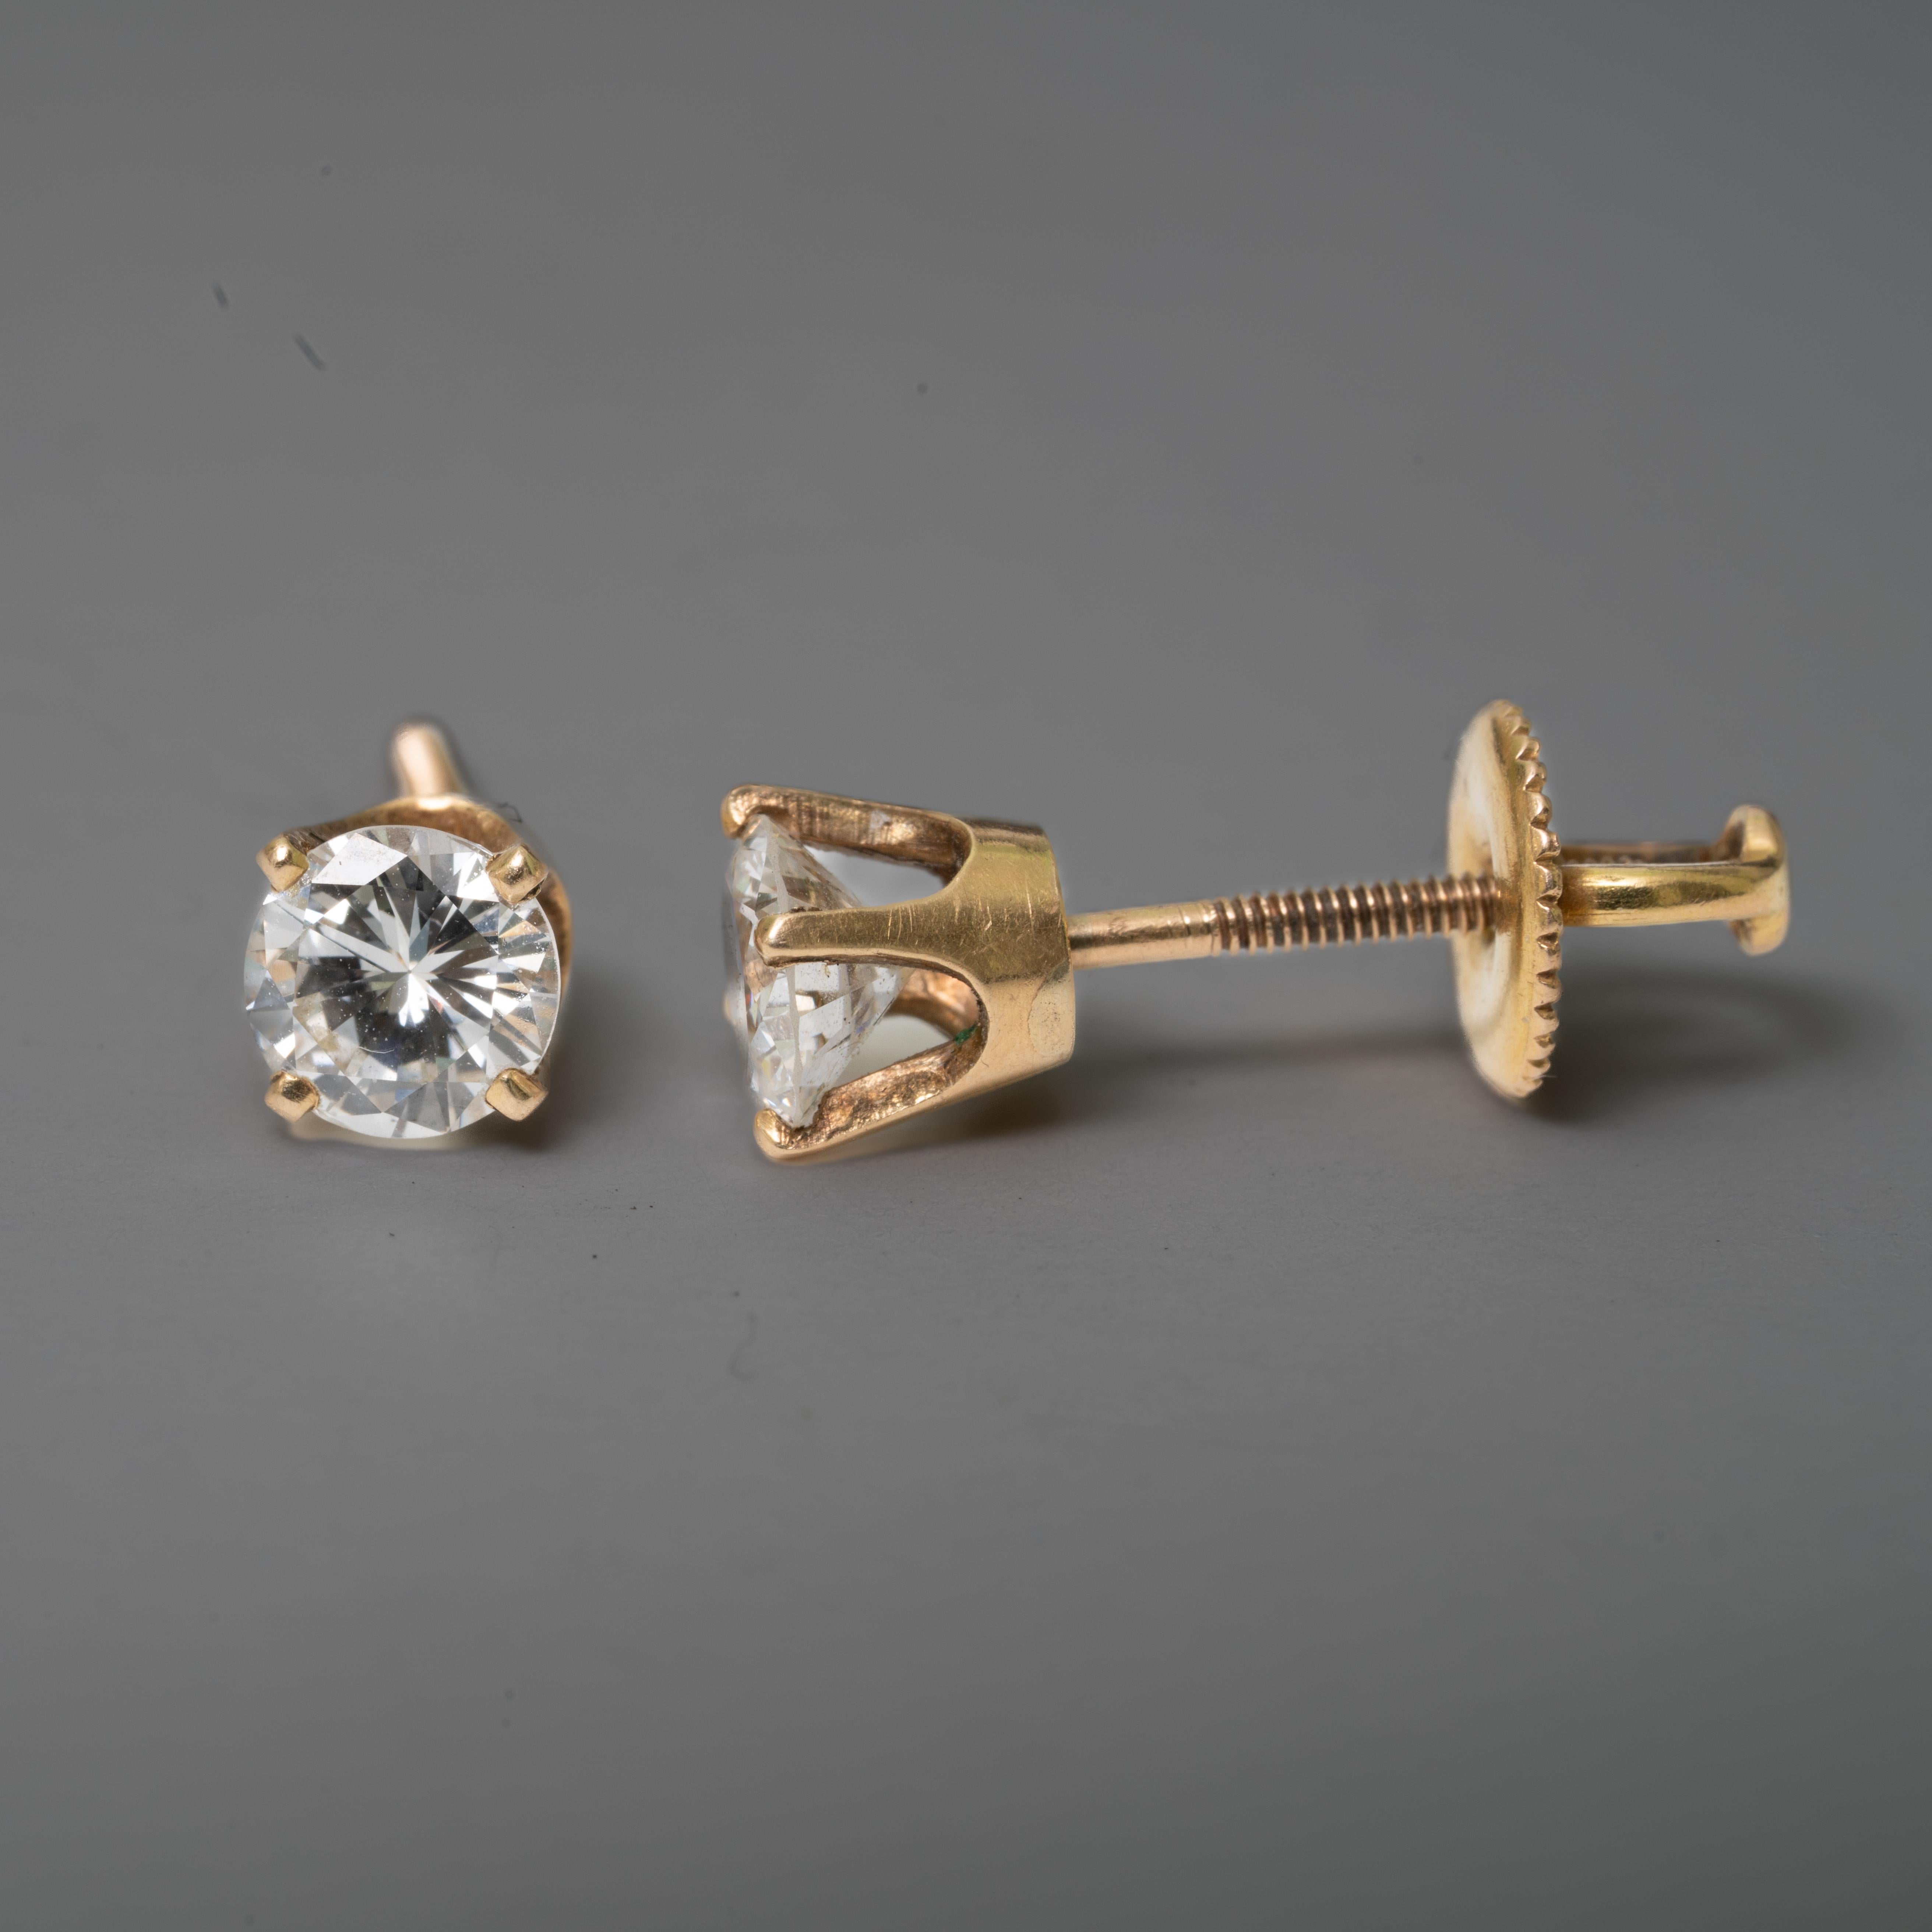 14k diamond studs, 1 dwt. The diamonds are approximately .48ct each, with a VS1 clarity and a K color.